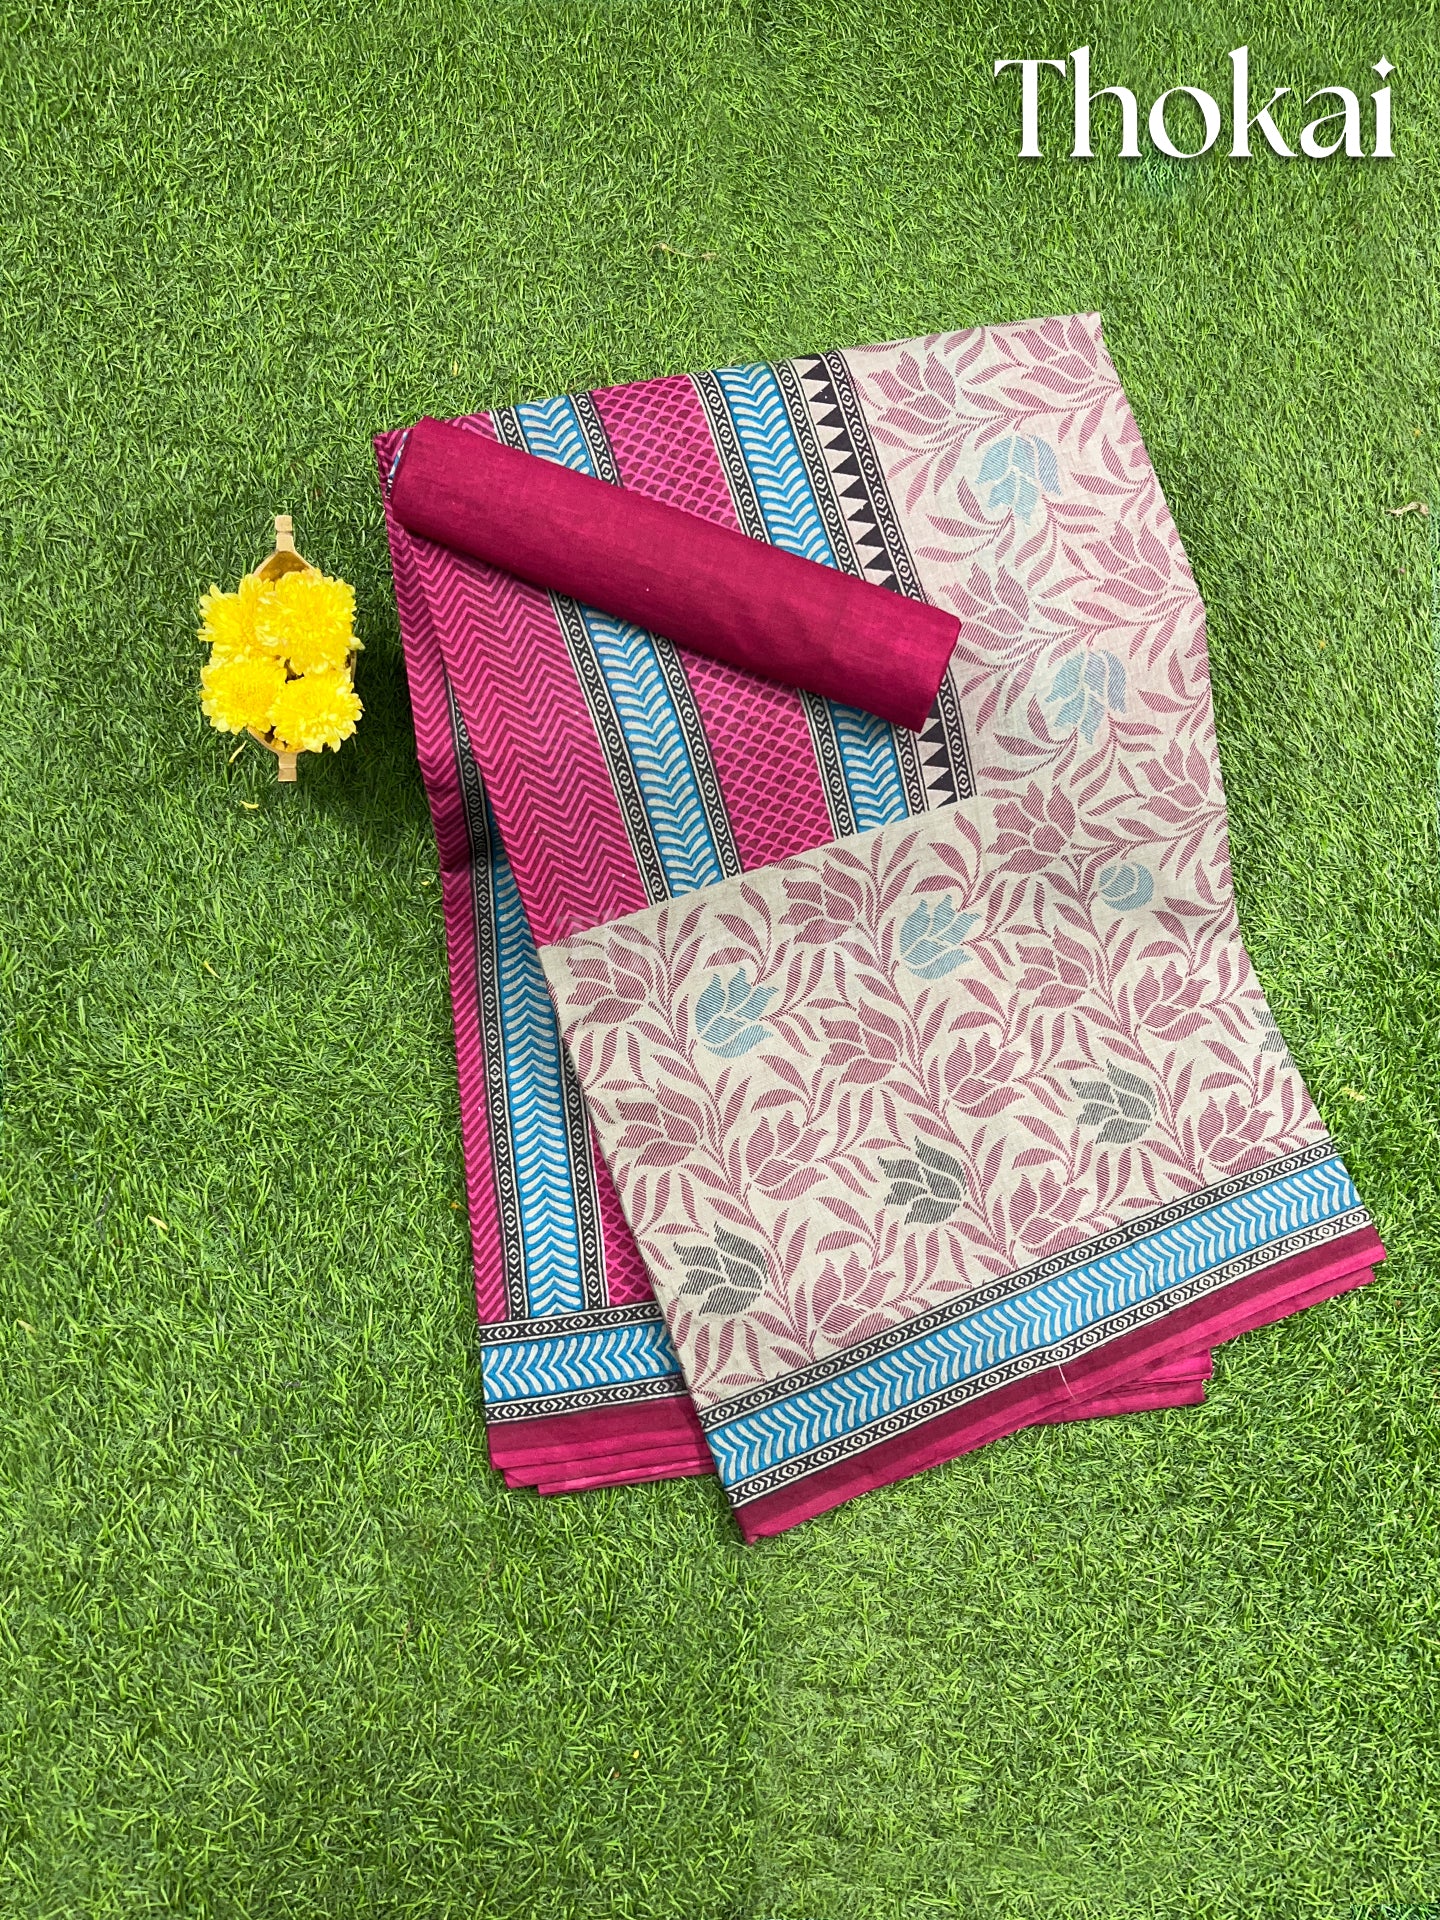 Beet red and blue printed cotton saree